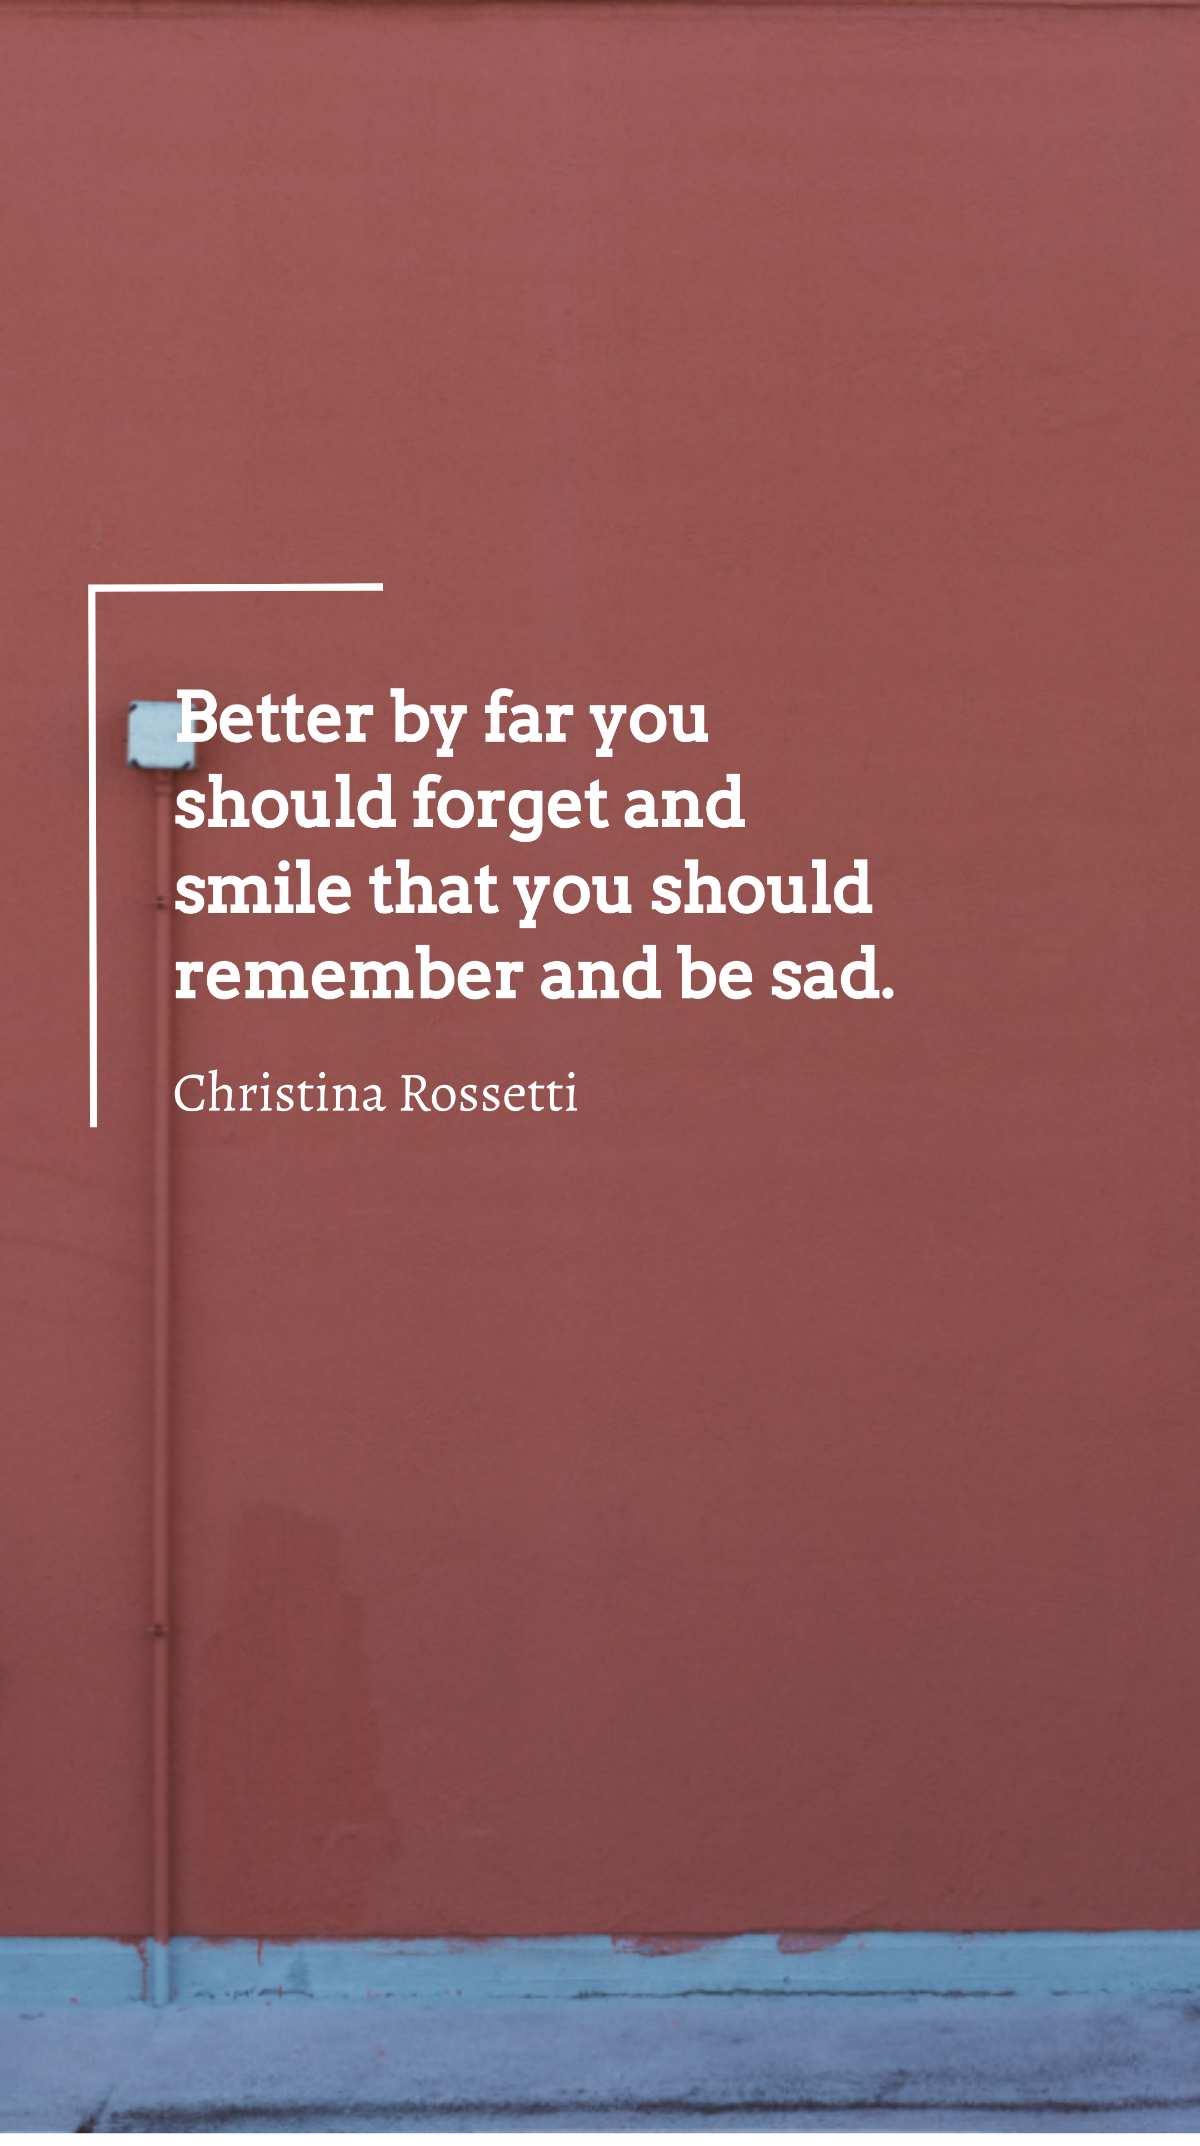 Christina Rossetti - Better by far you should forget and smile that you should remember and be sad. Template